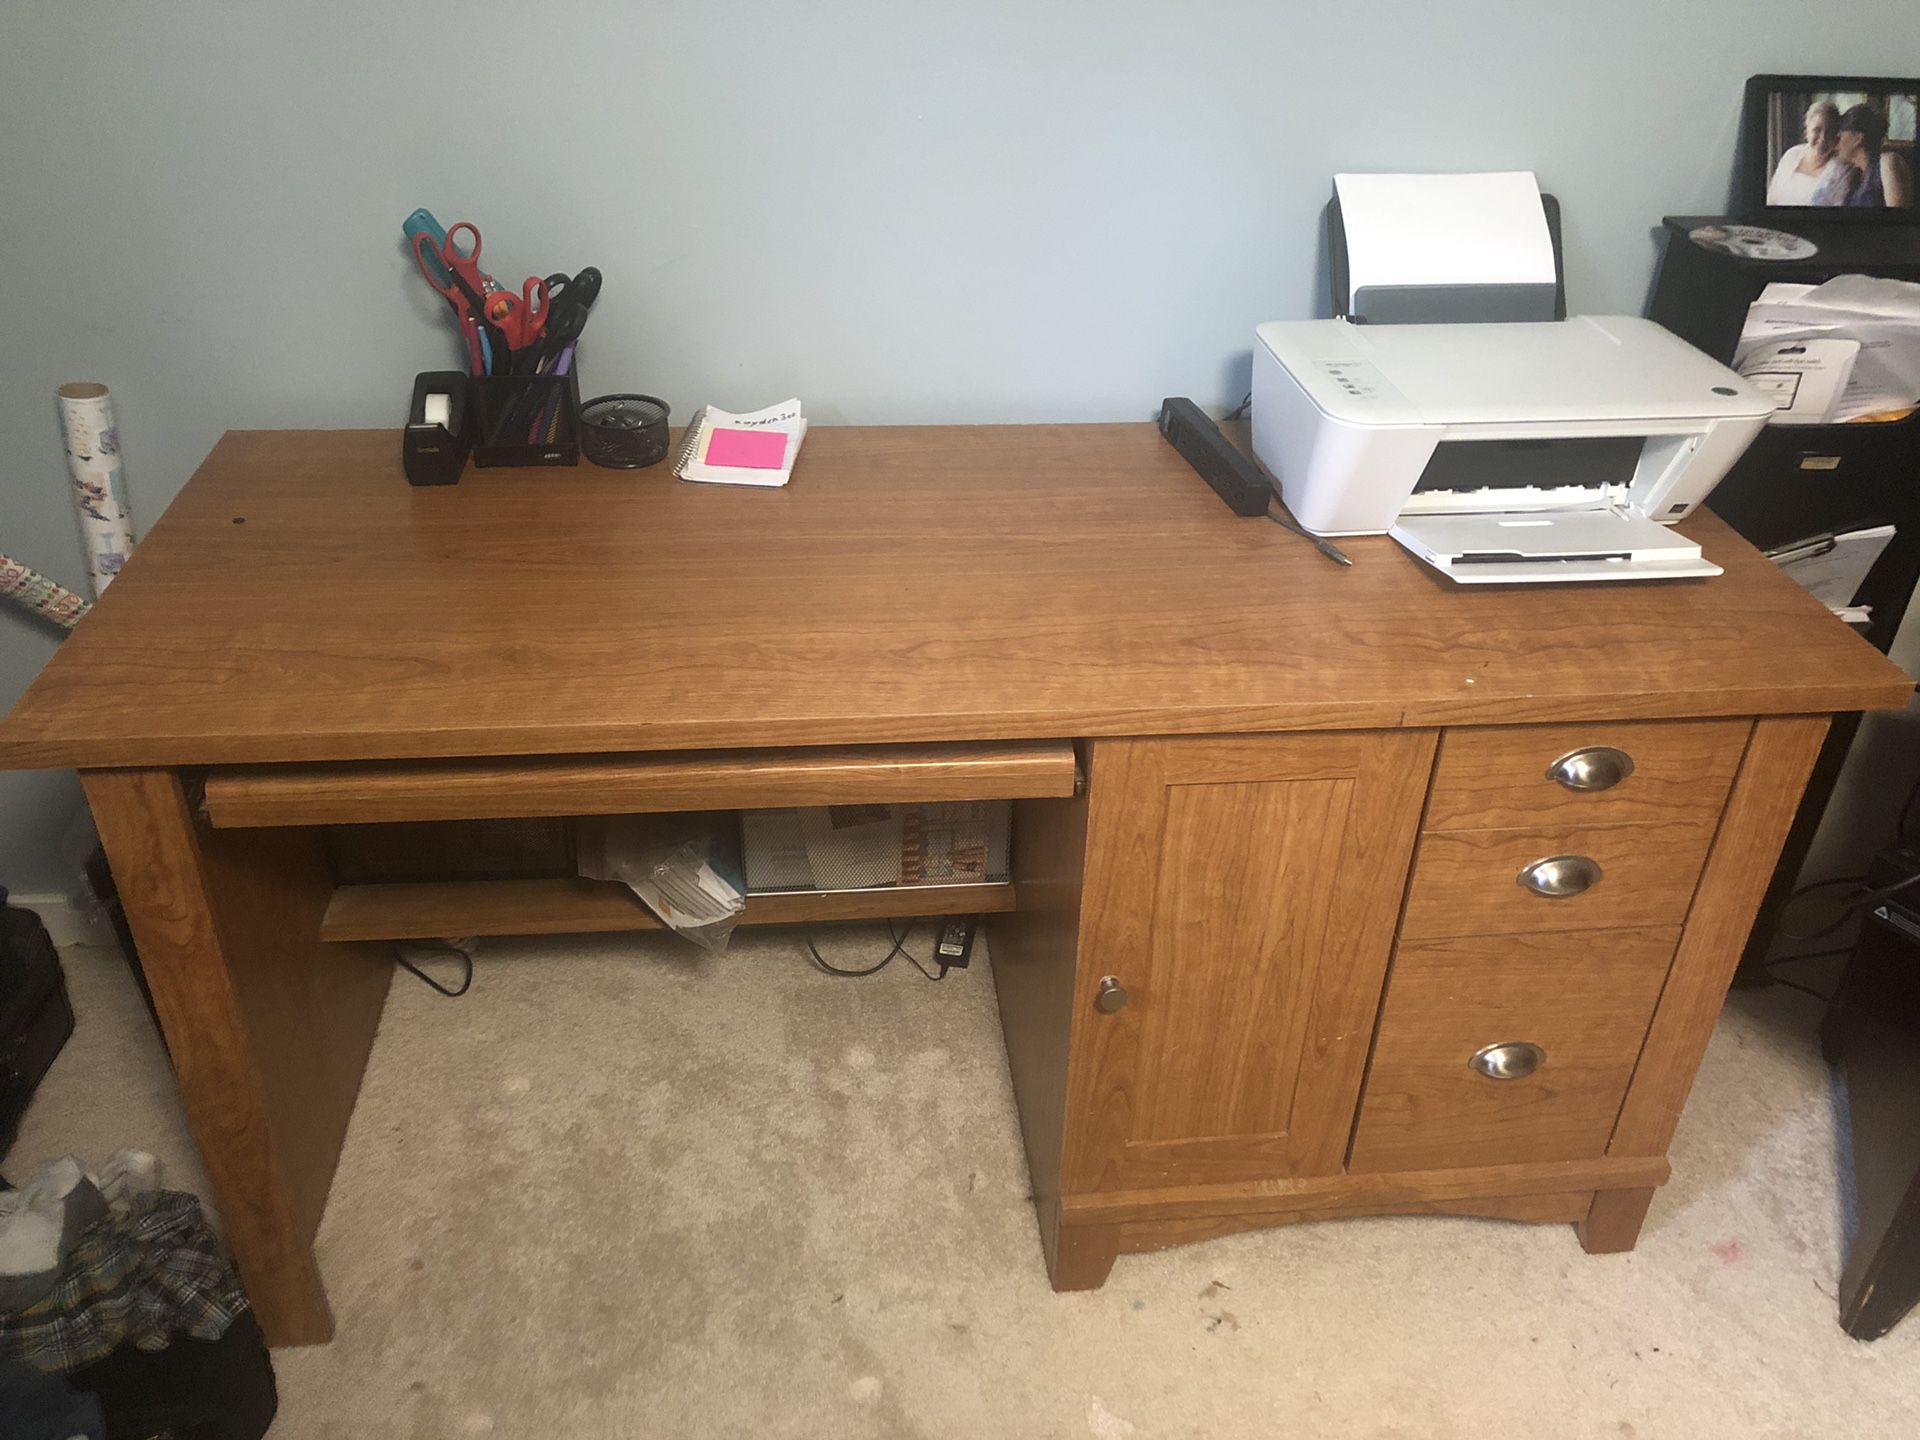 Desk with two big storage cabinets on the side and under desk shelf